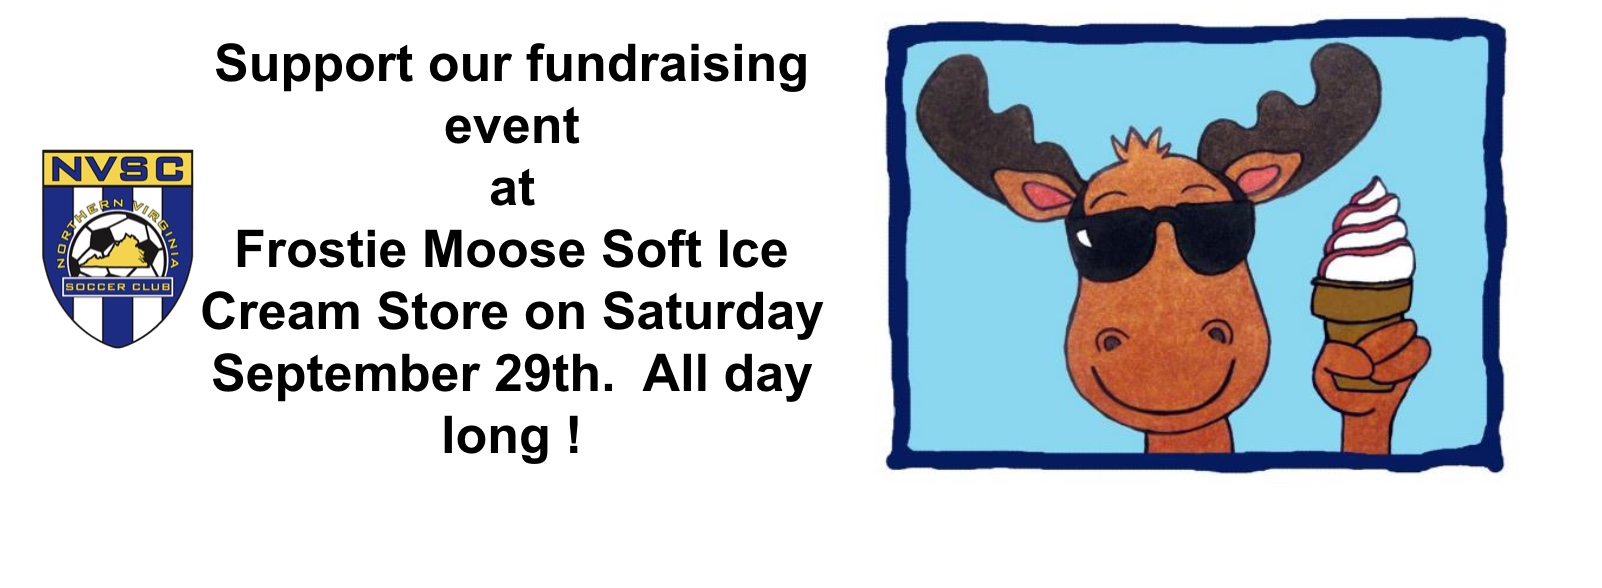 NVSC Fundraiser at the Frostie Moose